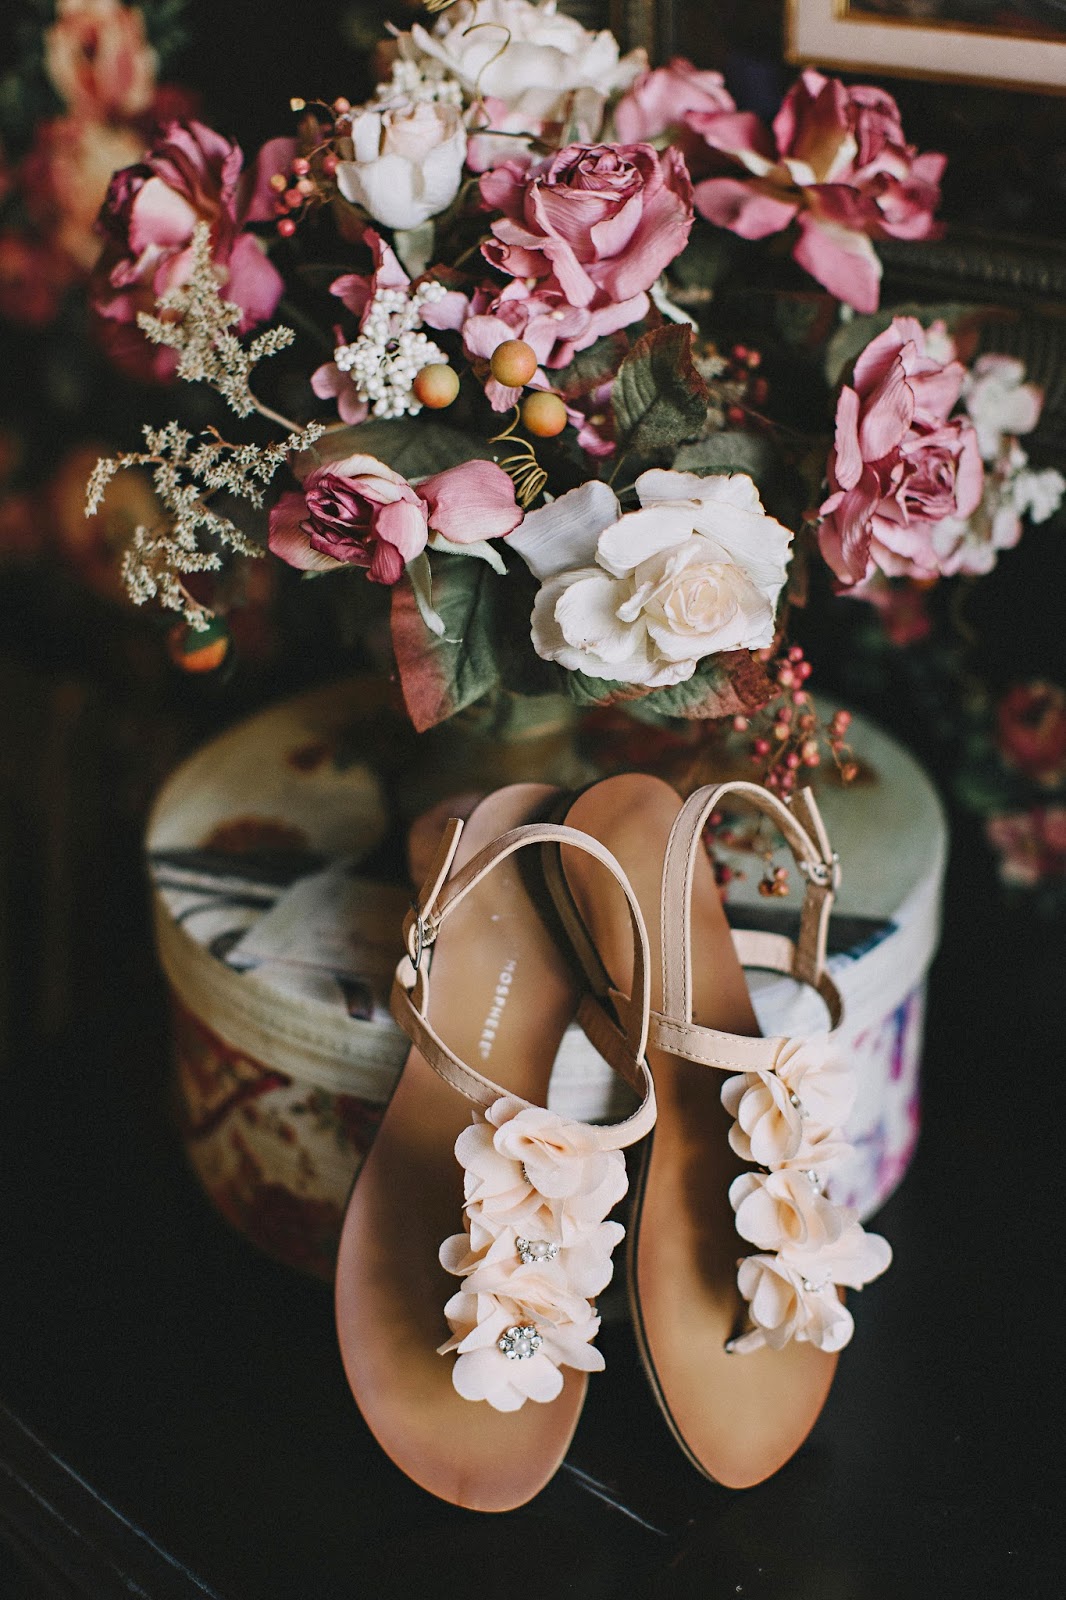 Sarah + Laura: 28th June 2014 - Our Wedding Photos - It's All In The ...